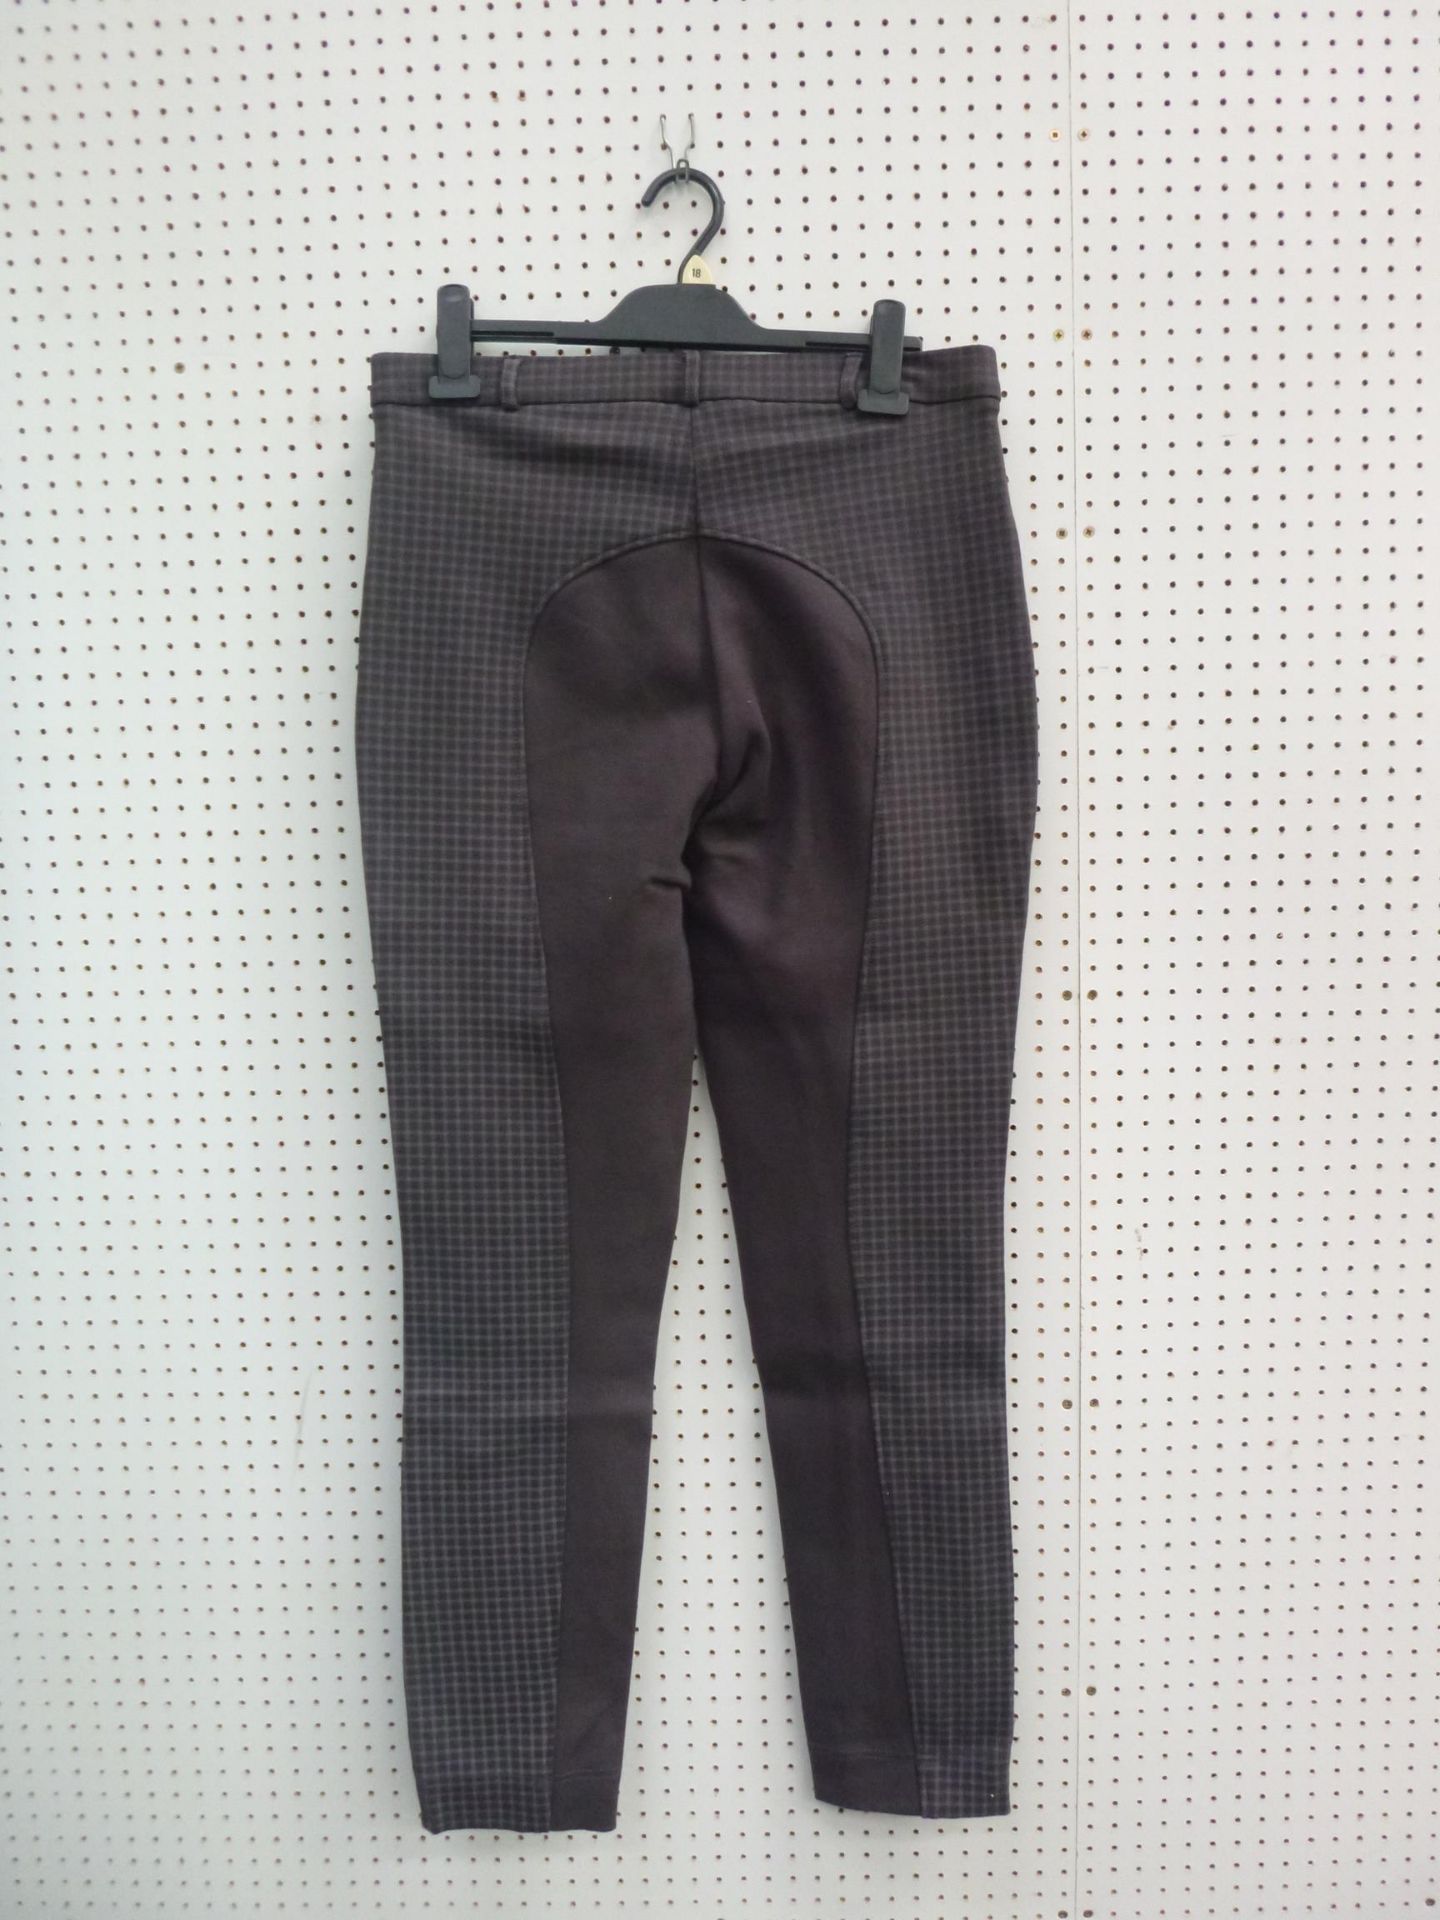 * Two pairs of New Bridleway Ladies Jodhpurs. A ladies Cotton Knitted Checks size 36 in Brown/ - Image 2 of 4